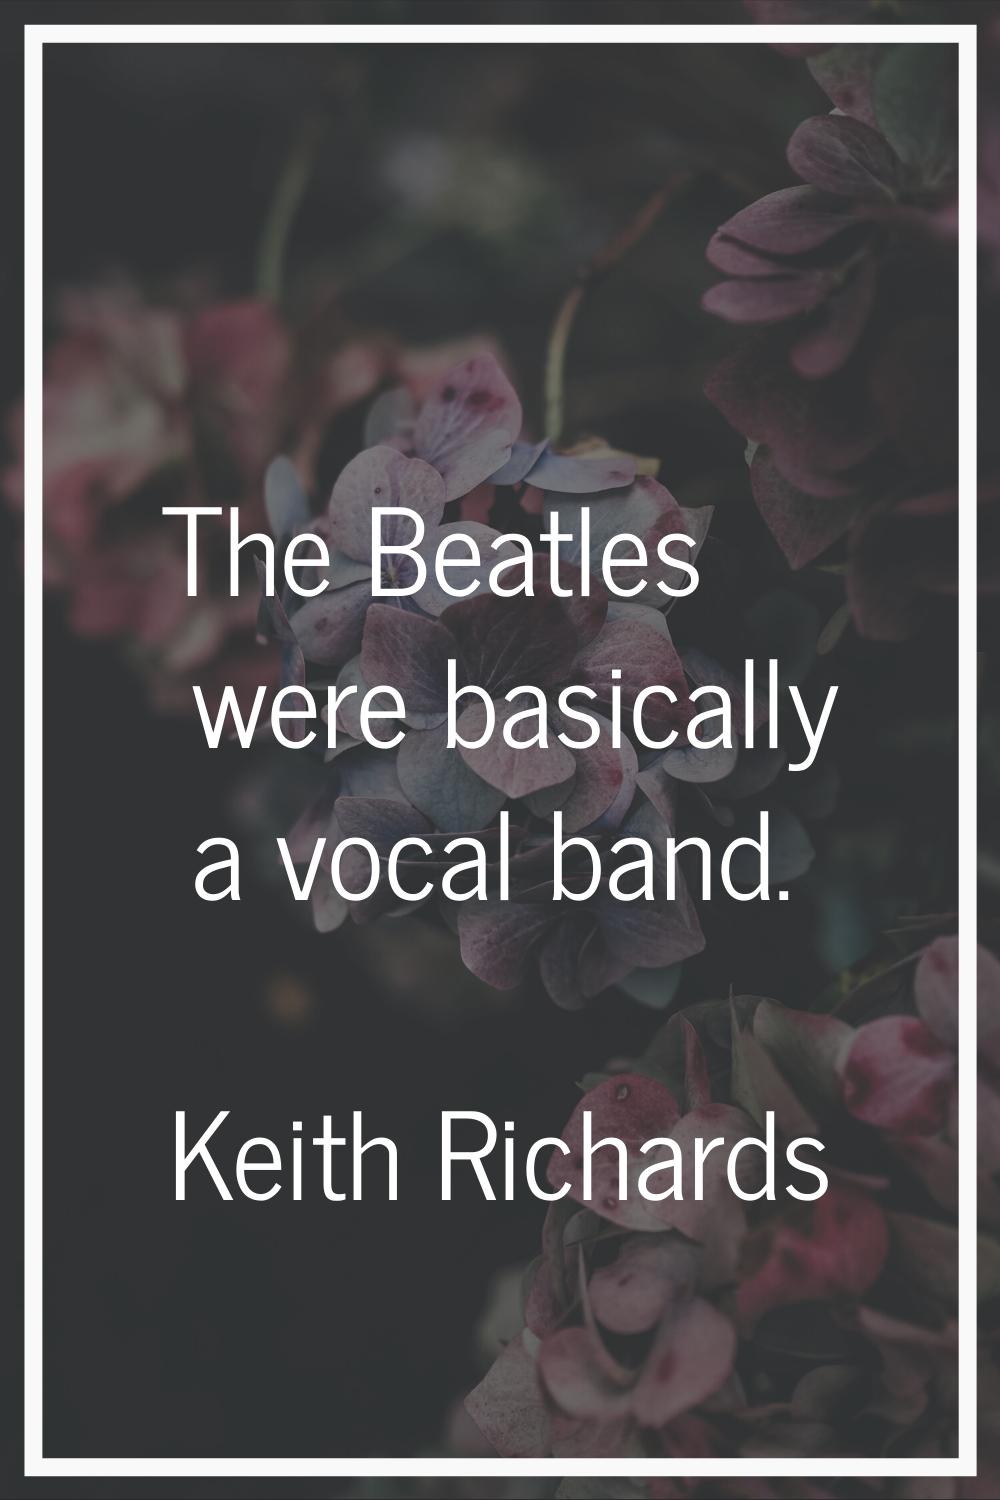 The Beatles were basically a vocal band.